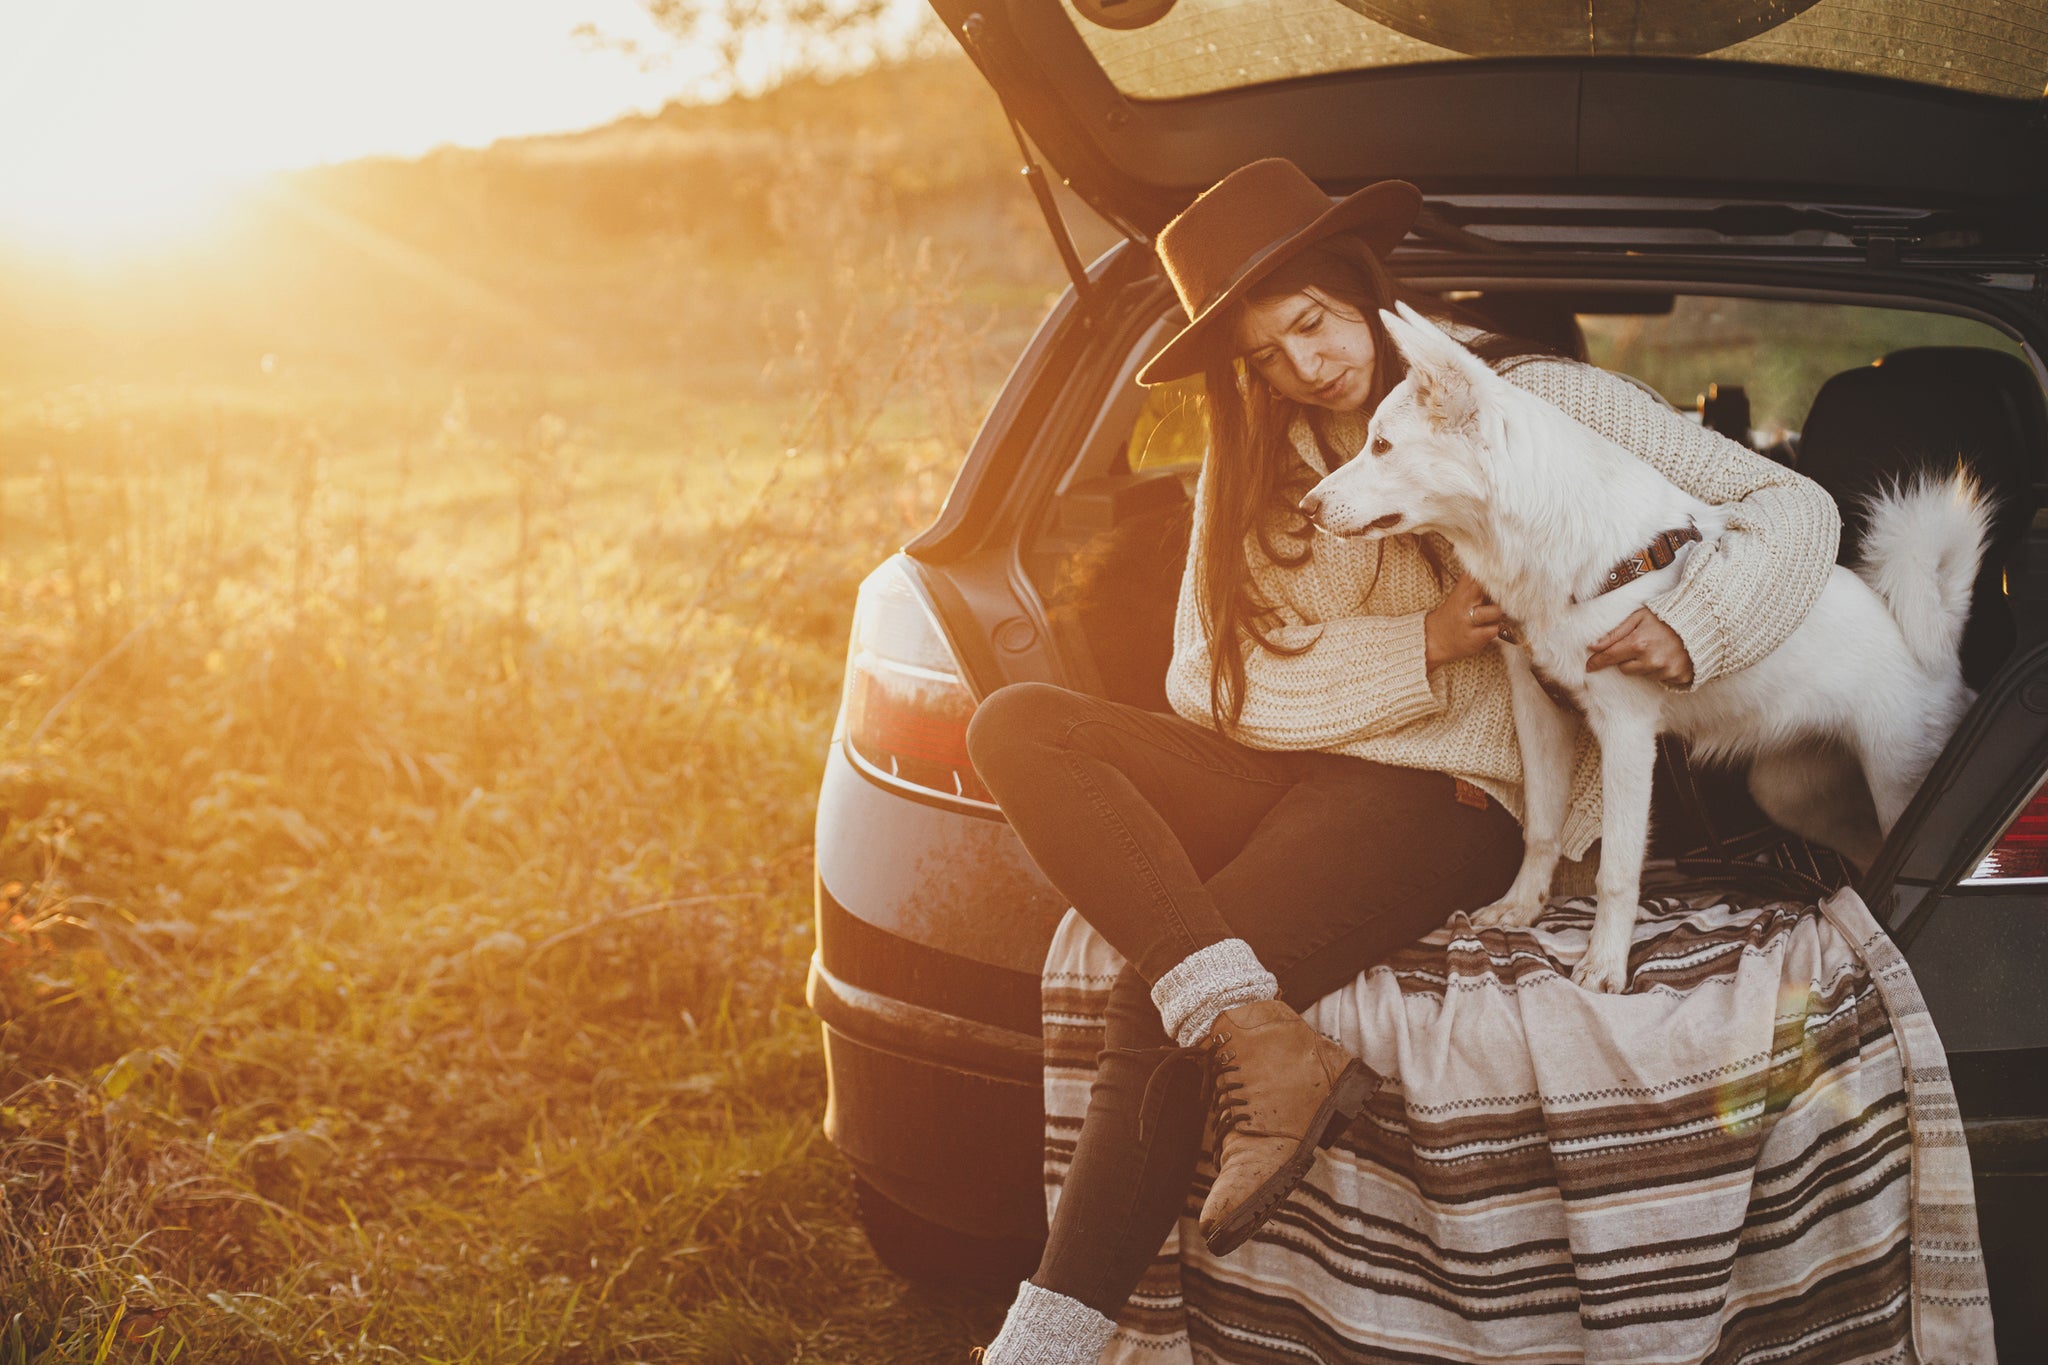 The Best Road Trip Destinations to Travel With Your Dog This Summer